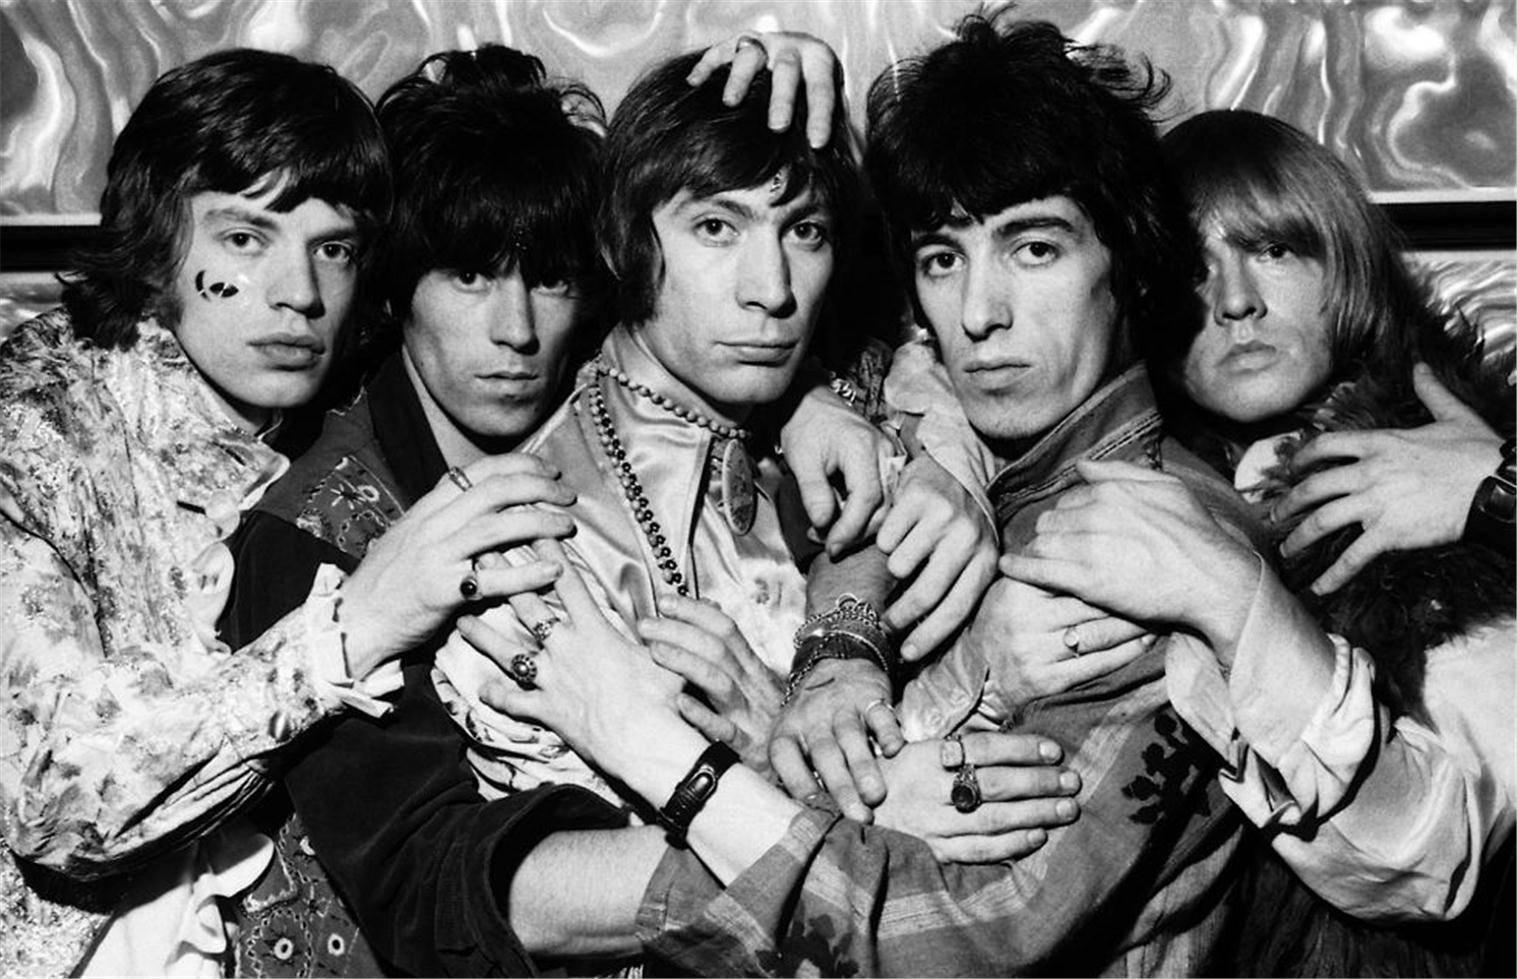 Michael Cooper (b.1941) Black and White Photograph - Rolling Stones, 1967